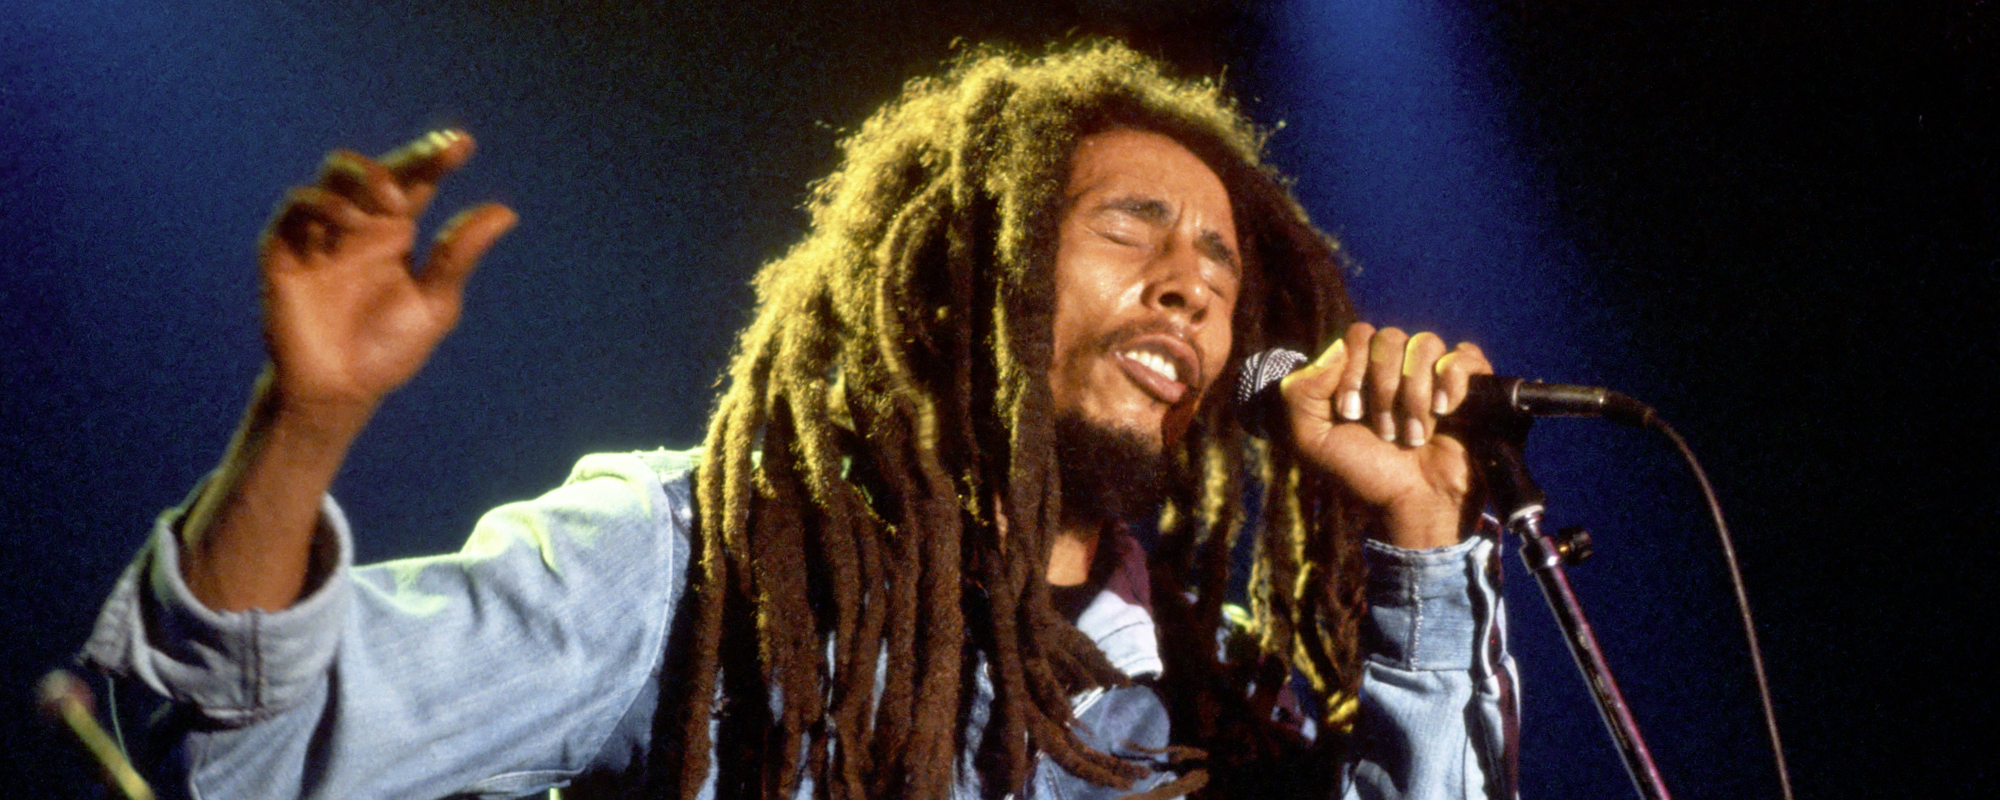 The Political Story Behind “Is This Love” by Bob Marley & The Wailers